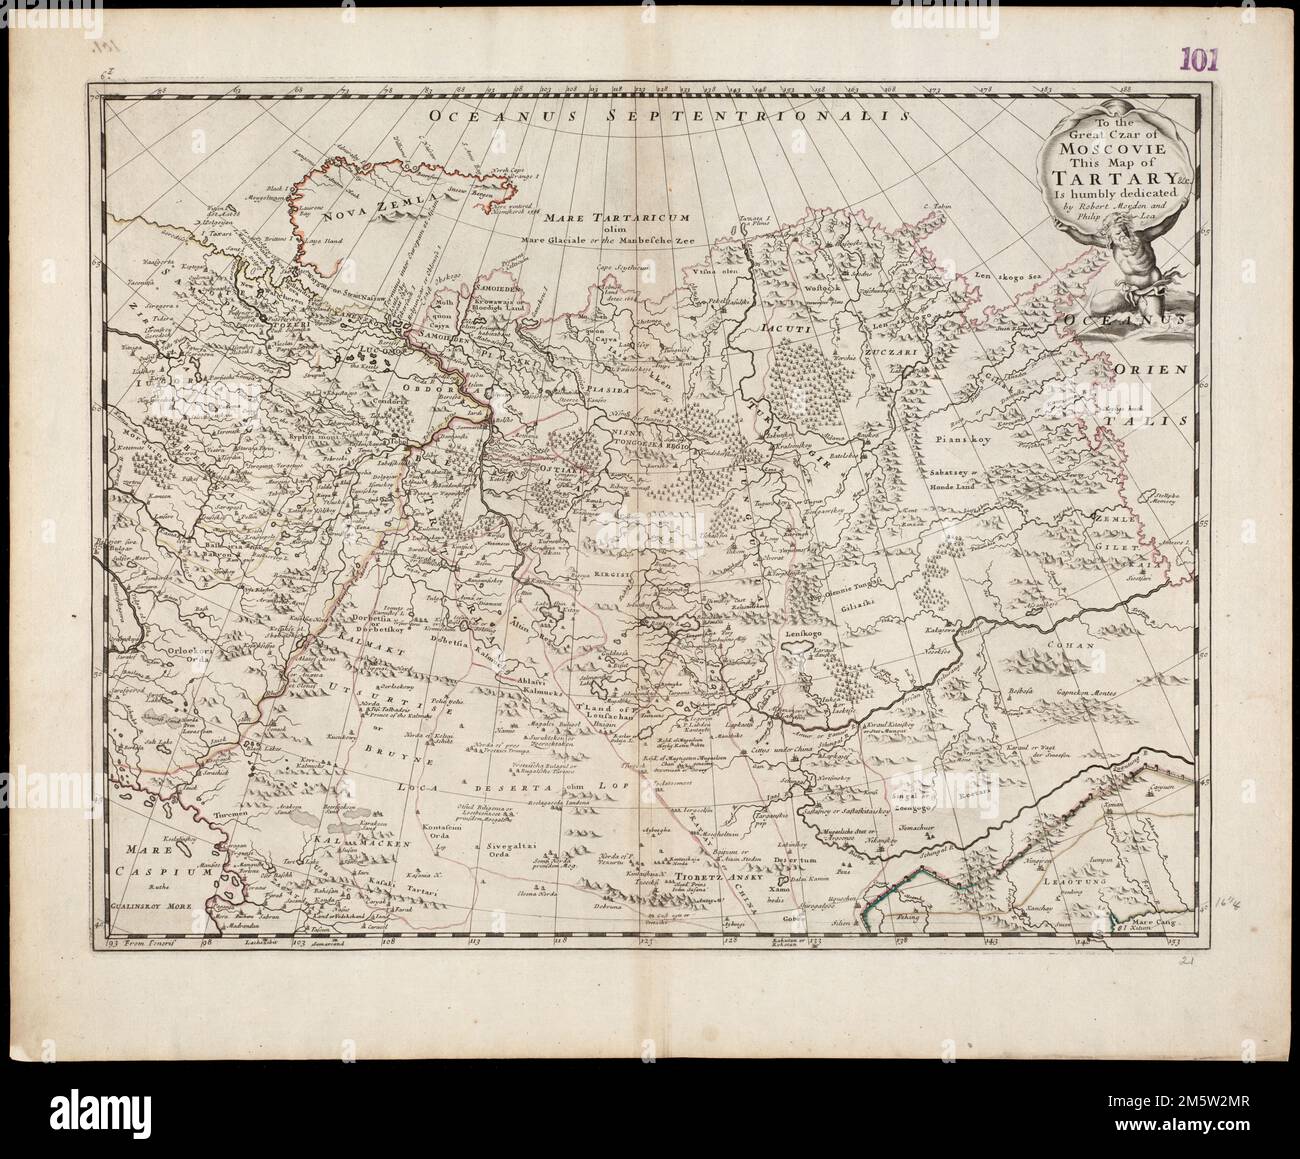 To the Great Czar of Moscovie this Map of Tartary &c. is humbly dedicated. Relief shown pictorially. Shows central Russia, south to the Great Wall of China. Cataloging, conservation, and digitization made possible in part by The National Endowment for the Humanities: Exploring the human endeavor. Part of composite portfolio atlas with title 'Collection of old maps.'.. Map of Tartary Collection of old maps. Map of Tartary Collection of old maps, Canada Eurasia  ,area Stock Photo